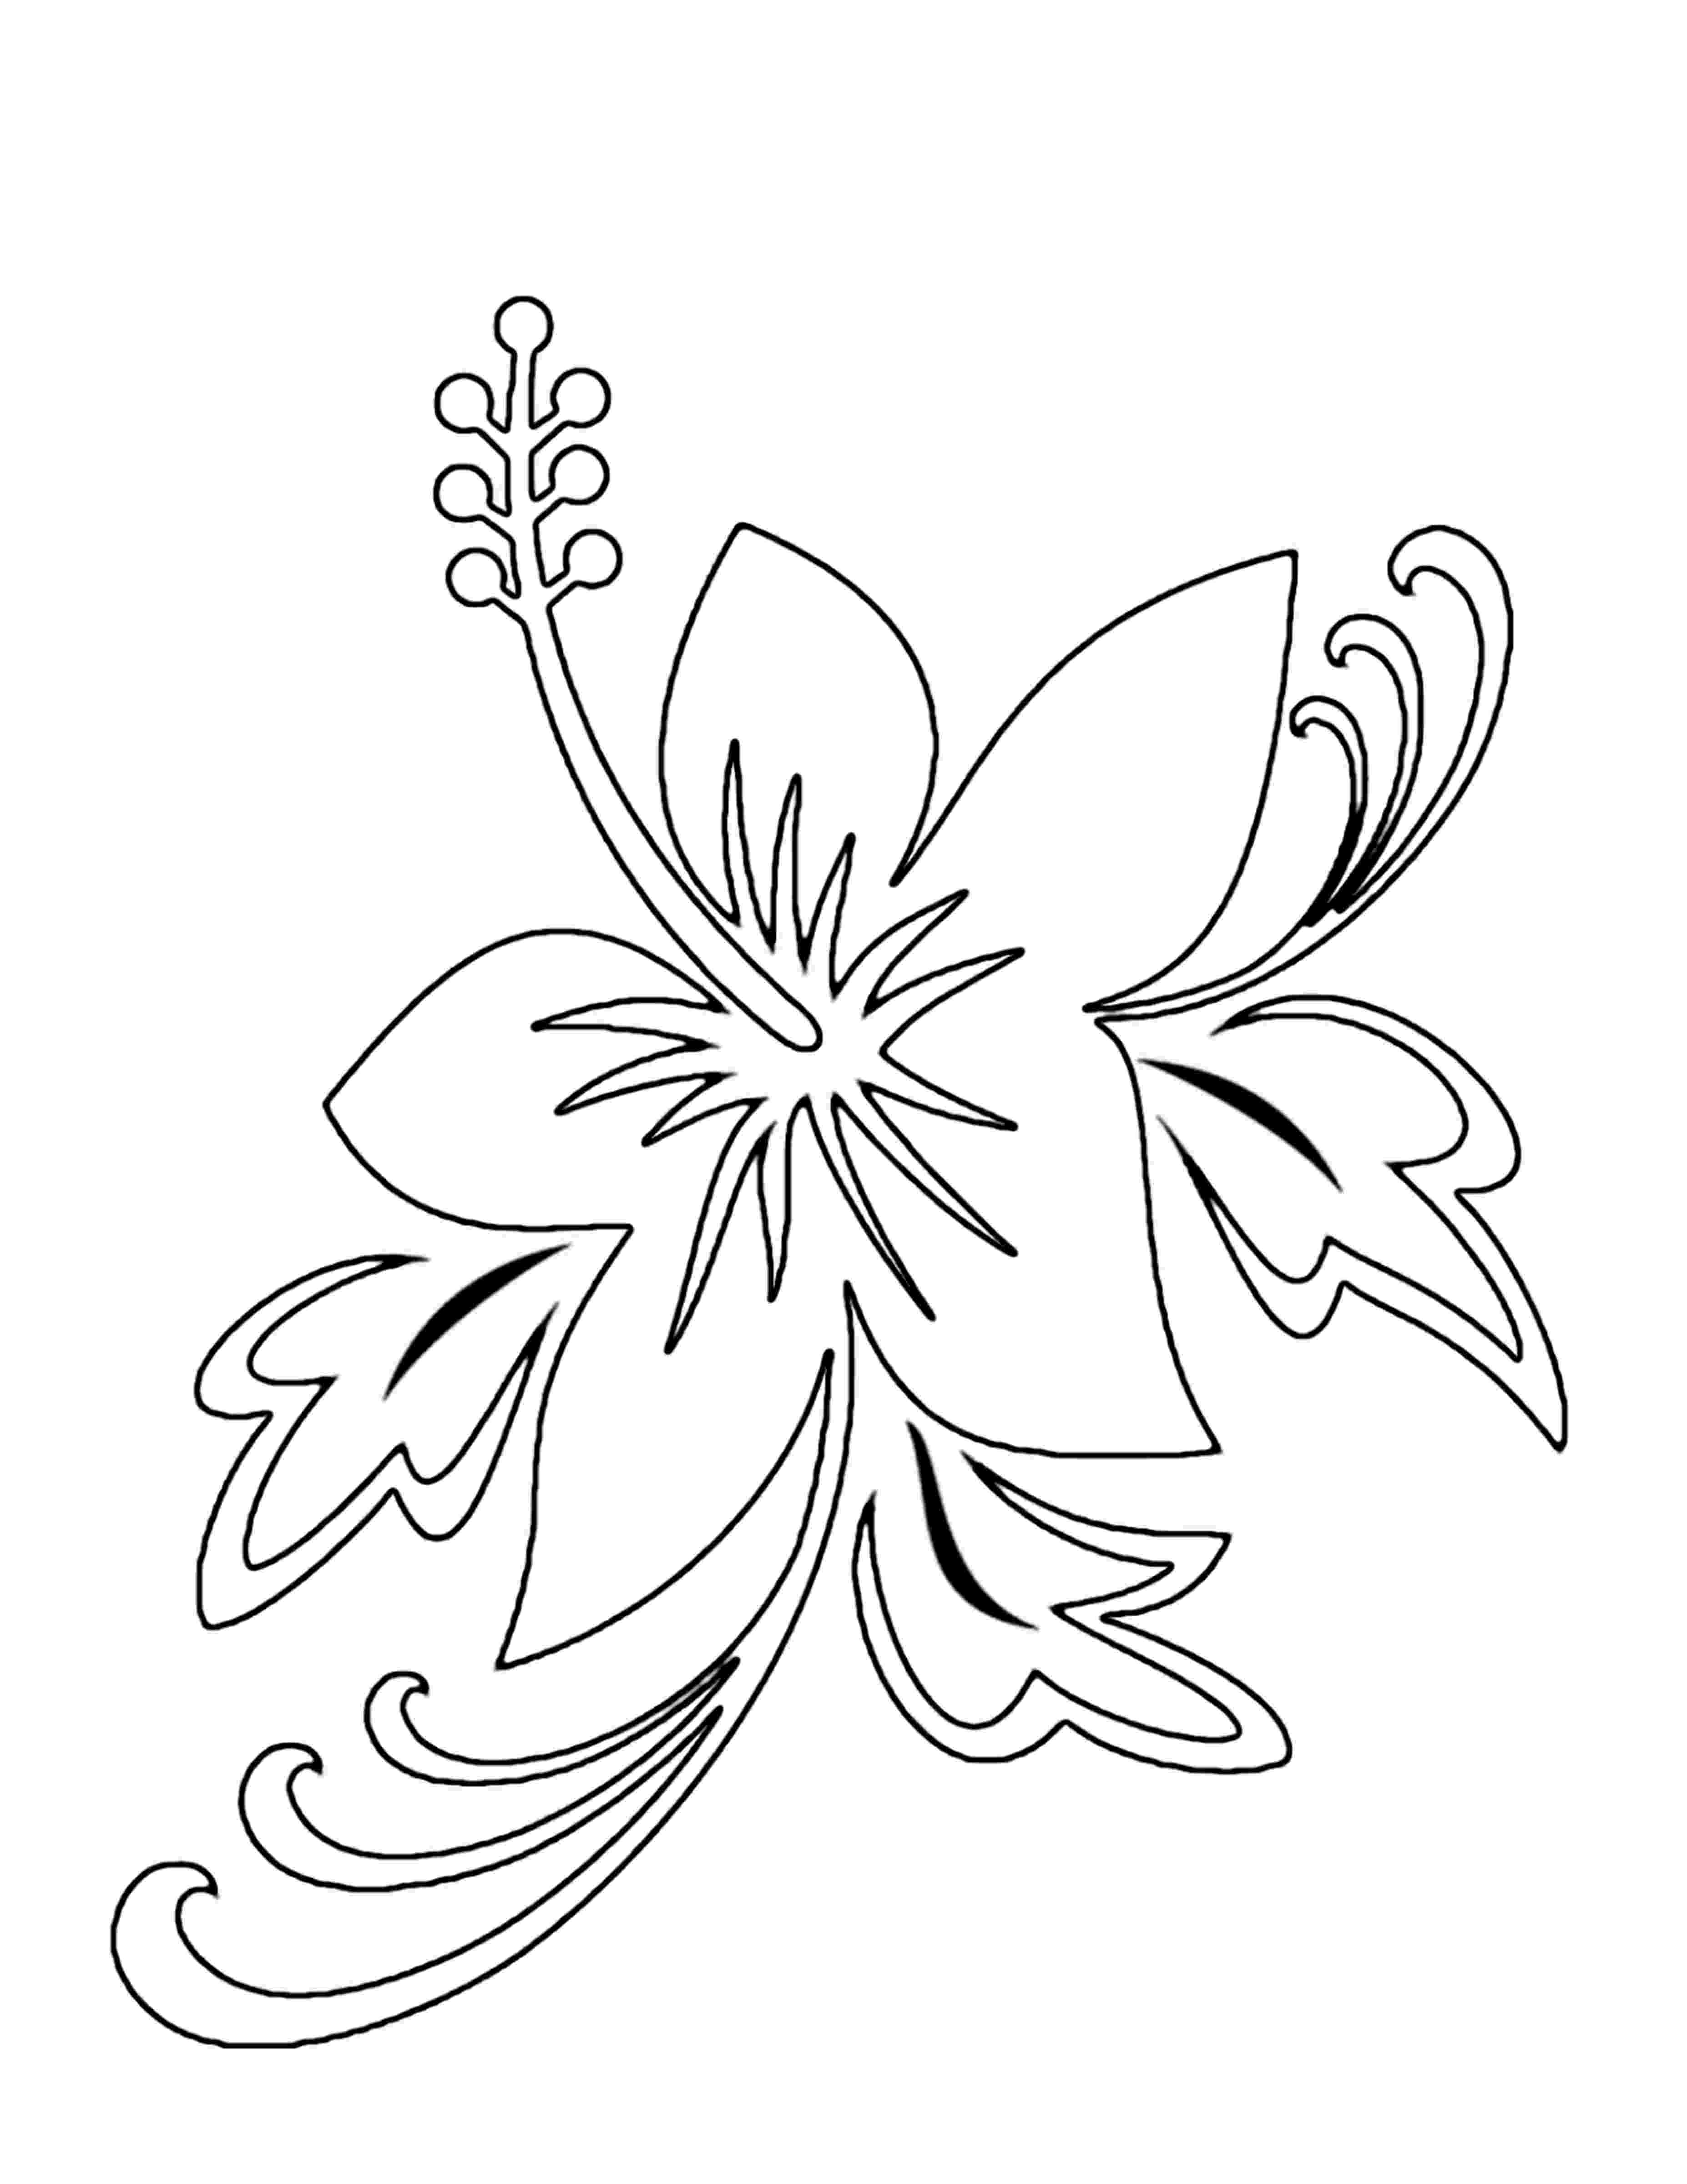 coloring images of flowers flower coloring pages hellokidscom images flowers of coloring 